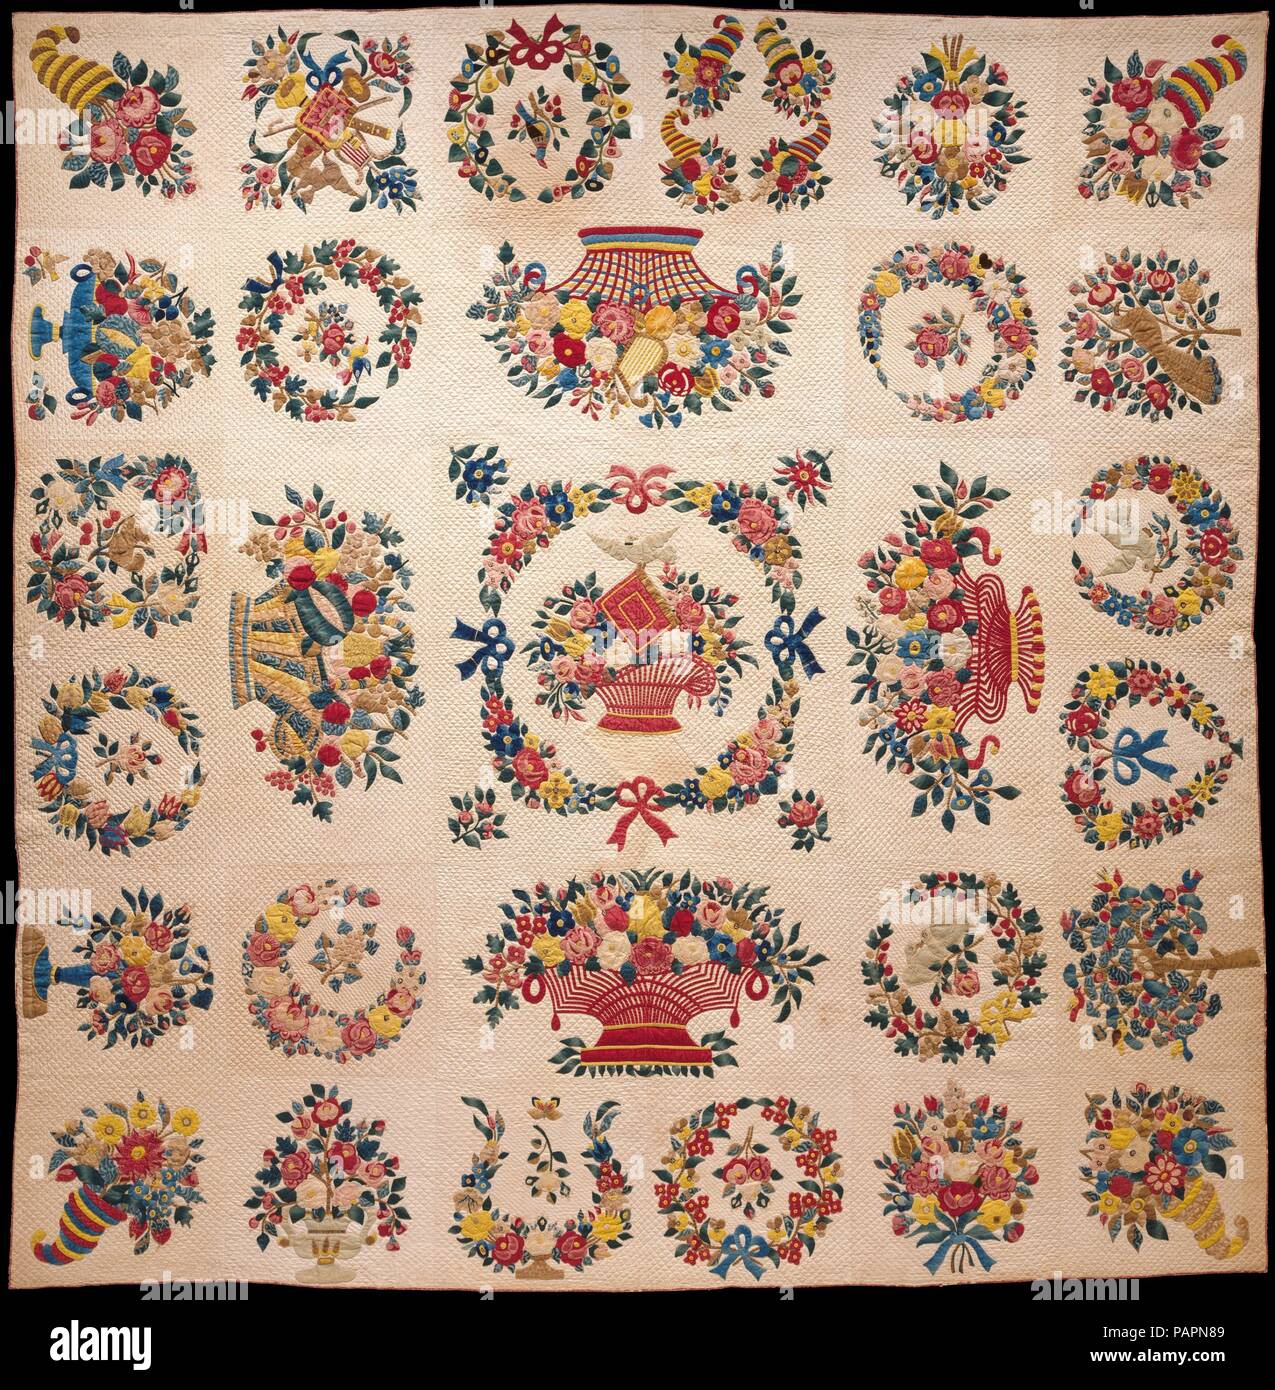 Quilt, Presentation pattern. Culture: American. Designer: Designs attributed to Mary Hergenroder Simon (1808-1877). Dimensions: 106 1/4 x 103 3/4 in. (269.9 x 263.5 cm). Date: ca. 1849.  This Baltimore Presentation quilt is appliquéd with vibrant floral wreaths, a delicate basket of fruits and flowers, and assorted birds in multicolored cottons. It is most likely the work of Mary Simon (born 1810), who is thought to have worked as a professional quiltmaker in Baltimore during the 1840s and 1850s. The designs on the quilt are separate bits of brightly colored fabric. Since this quilt was made c Stock Photo